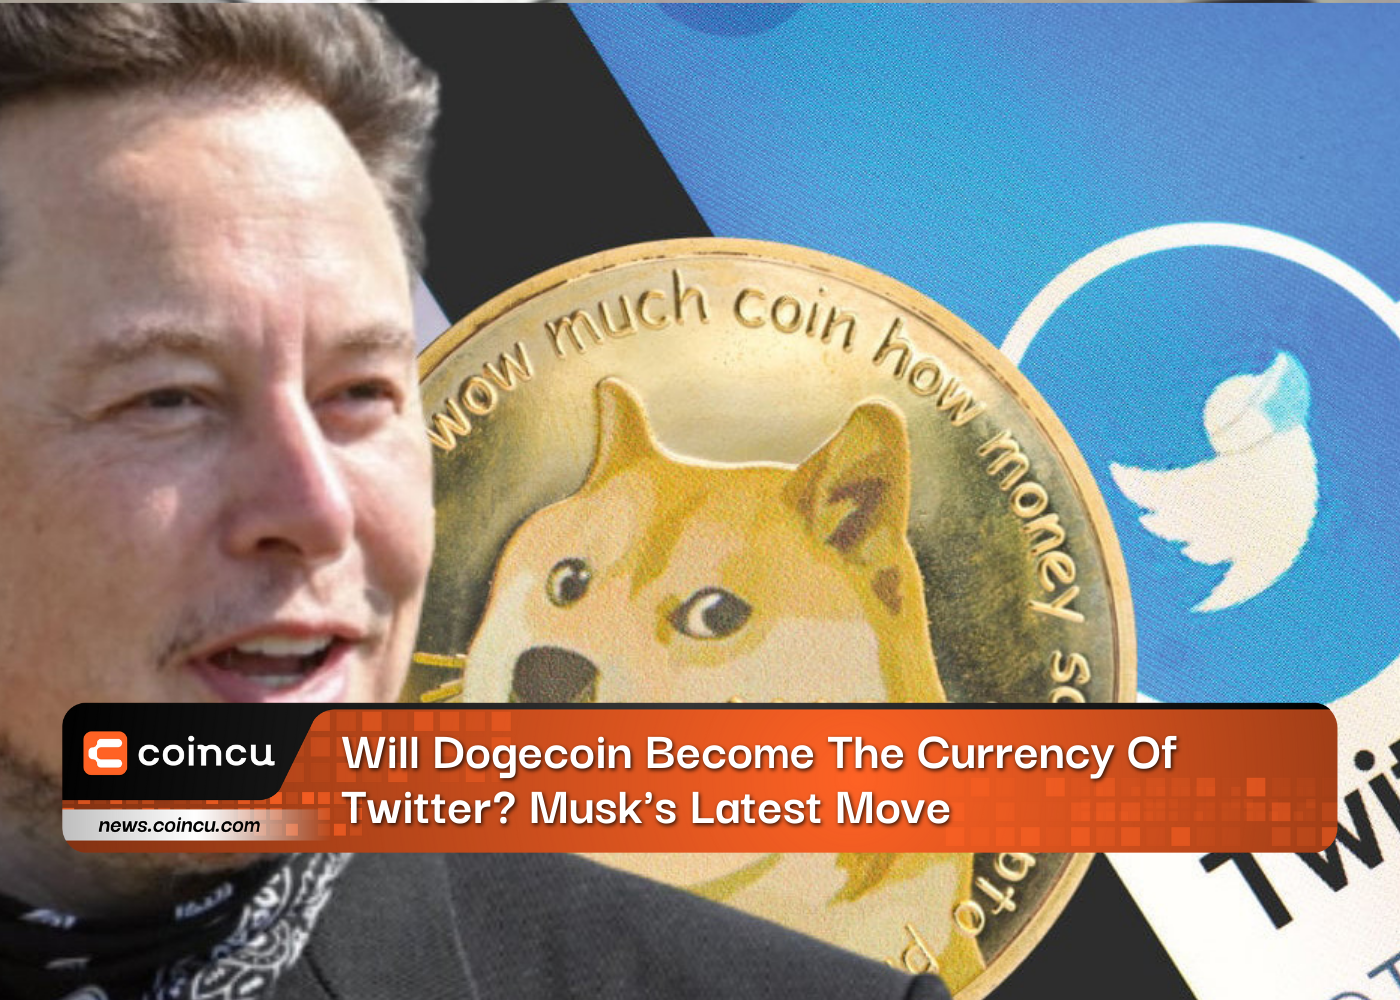 Will Dogecoin Become The Currency Of Twitter? Musk's Latest Move